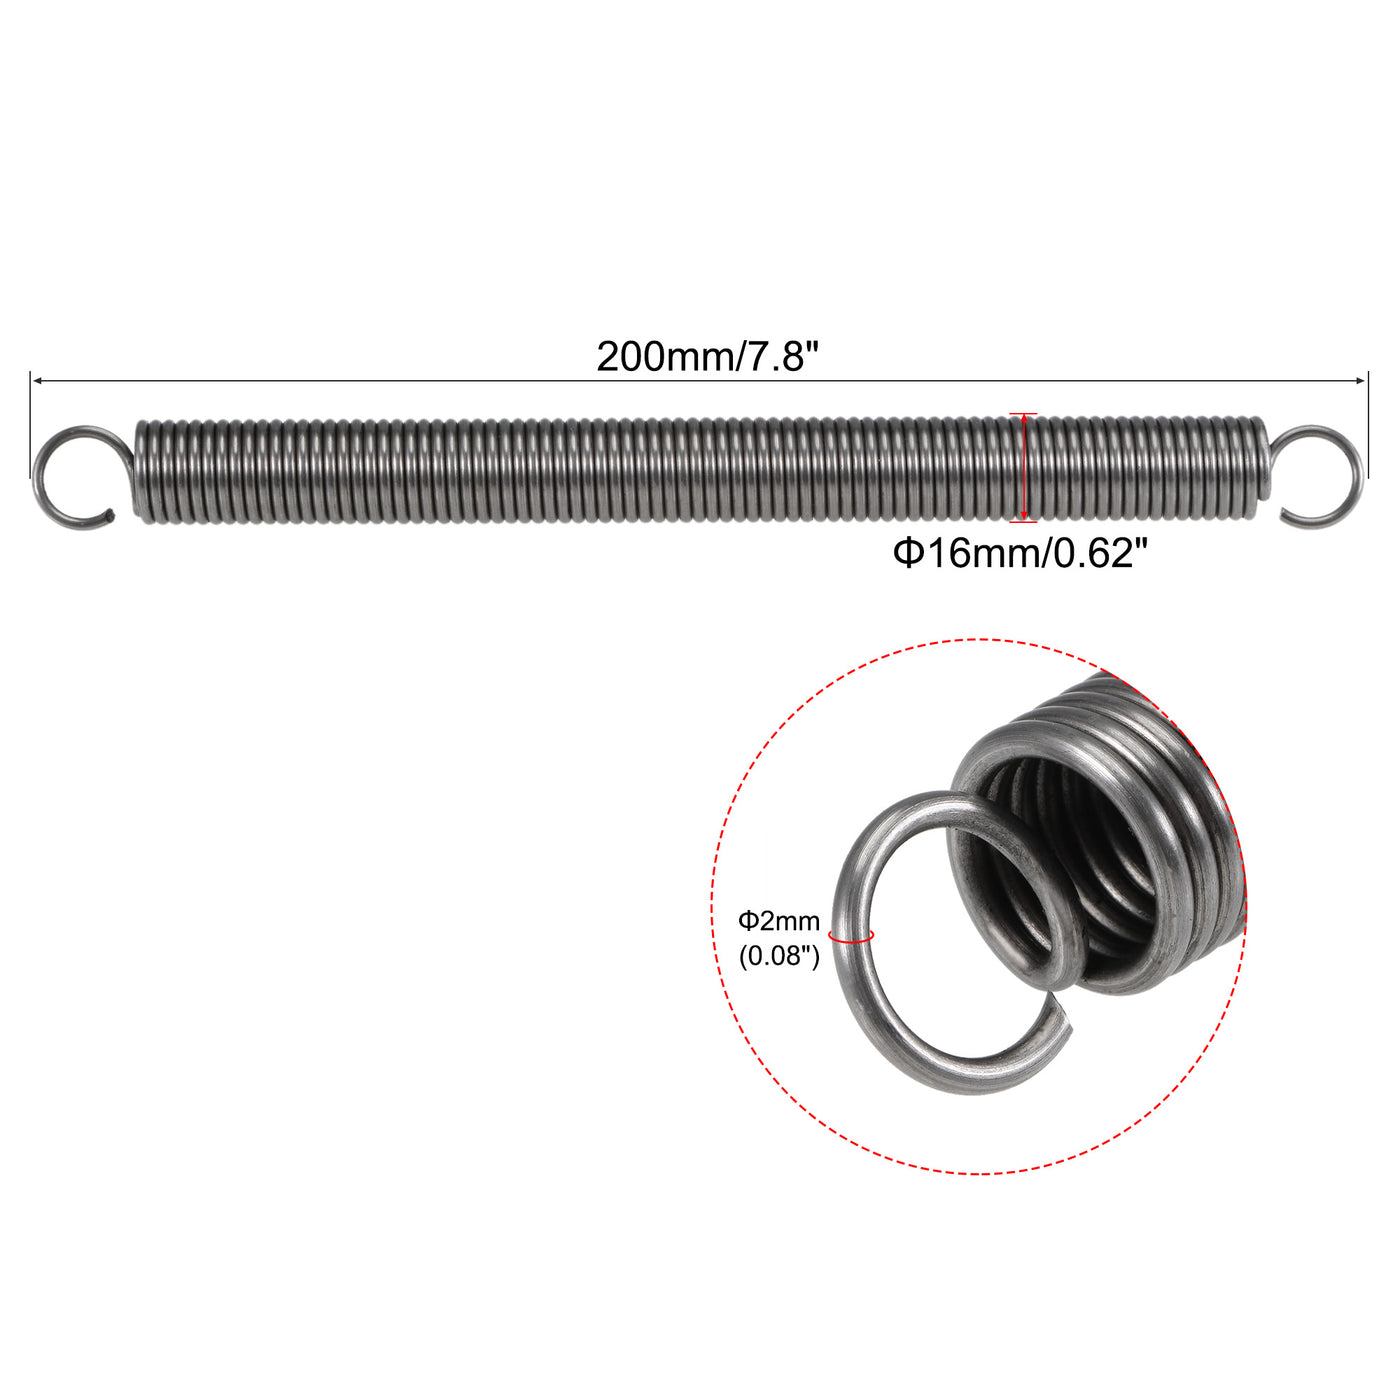 Uxcell Uxcell 2mmx16mmx300mm Extended Compression Spring ,33Lbs Load Capacity,Grey